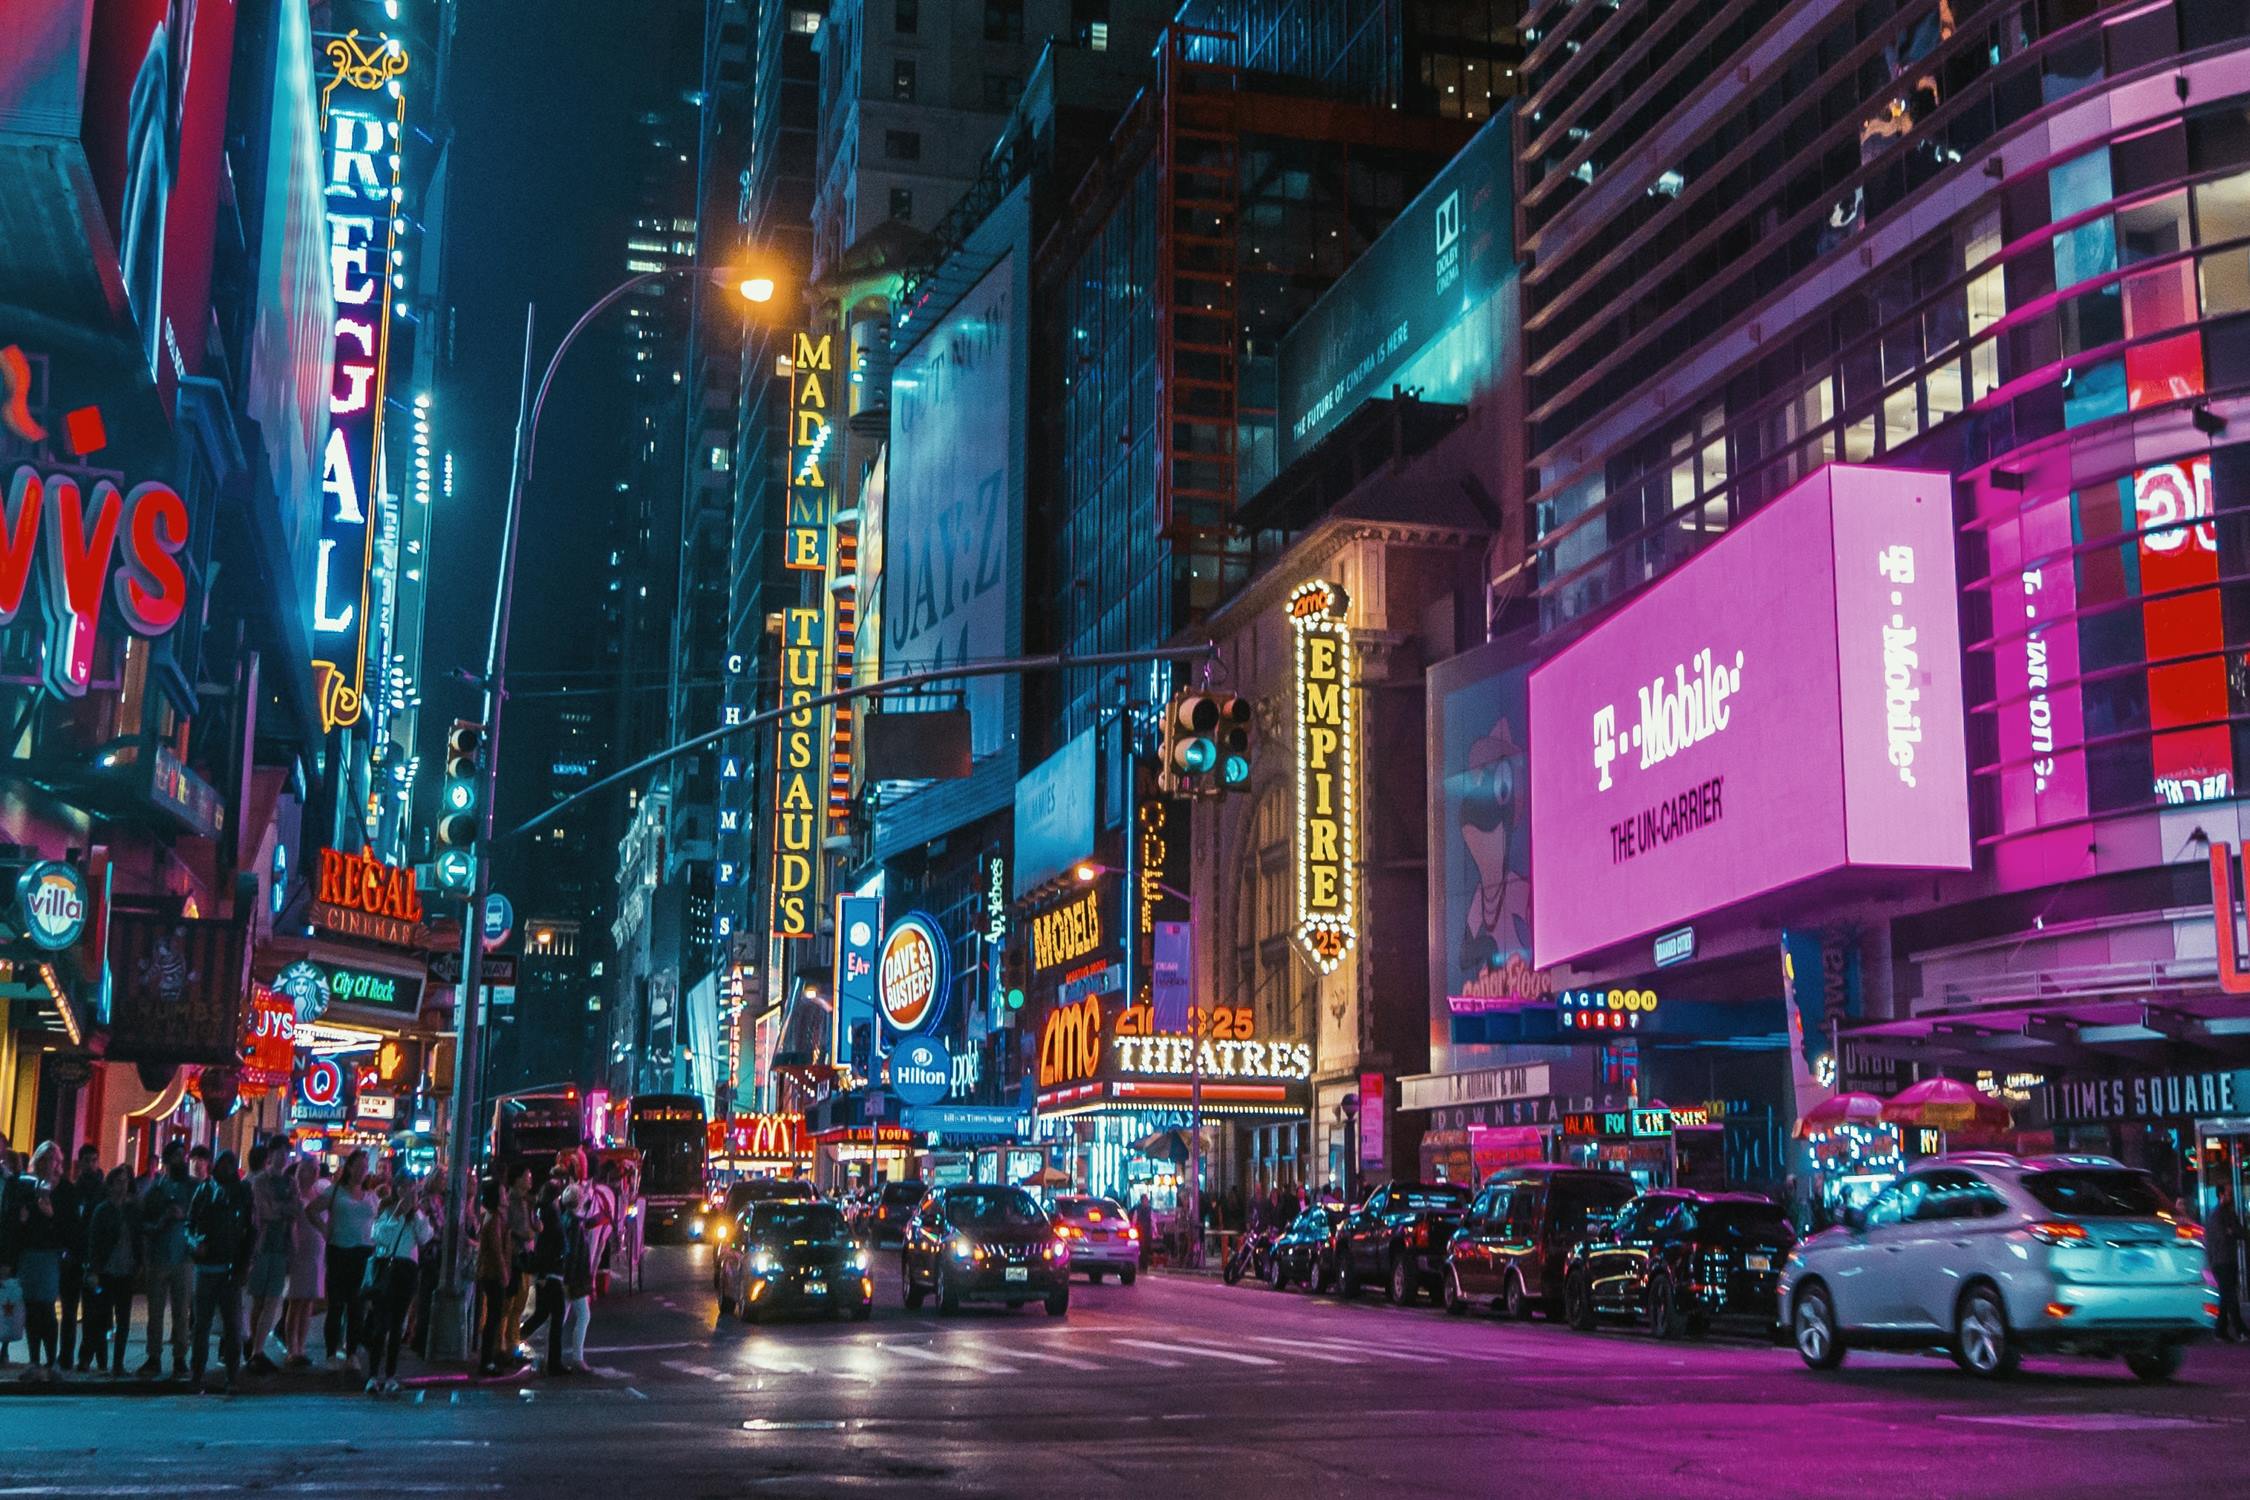 A neon-colored urban landscape from the street view.